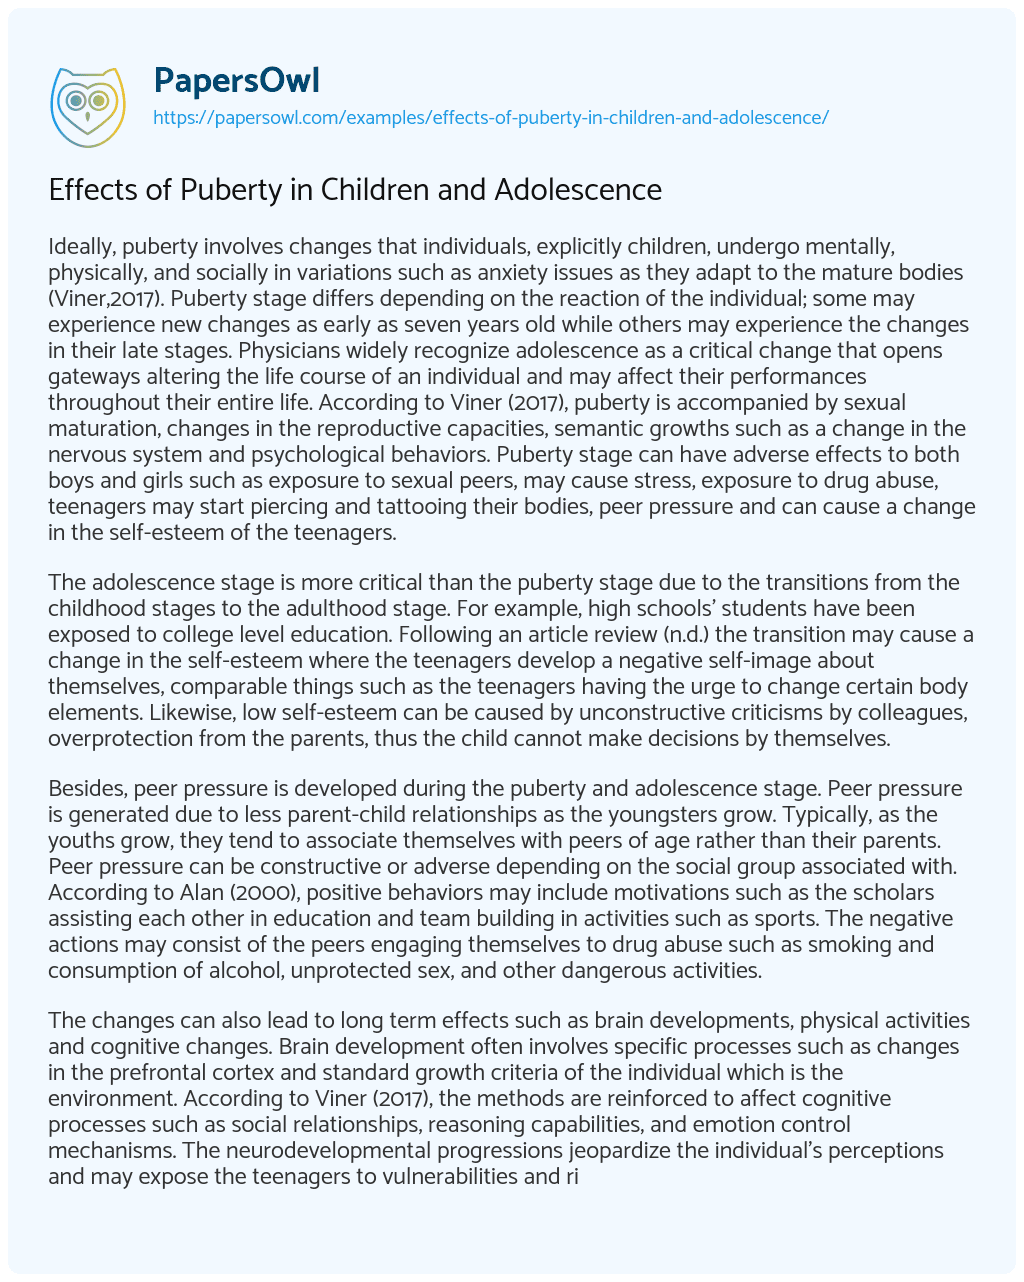 Effects of Puberty in Children and Adolescence essay